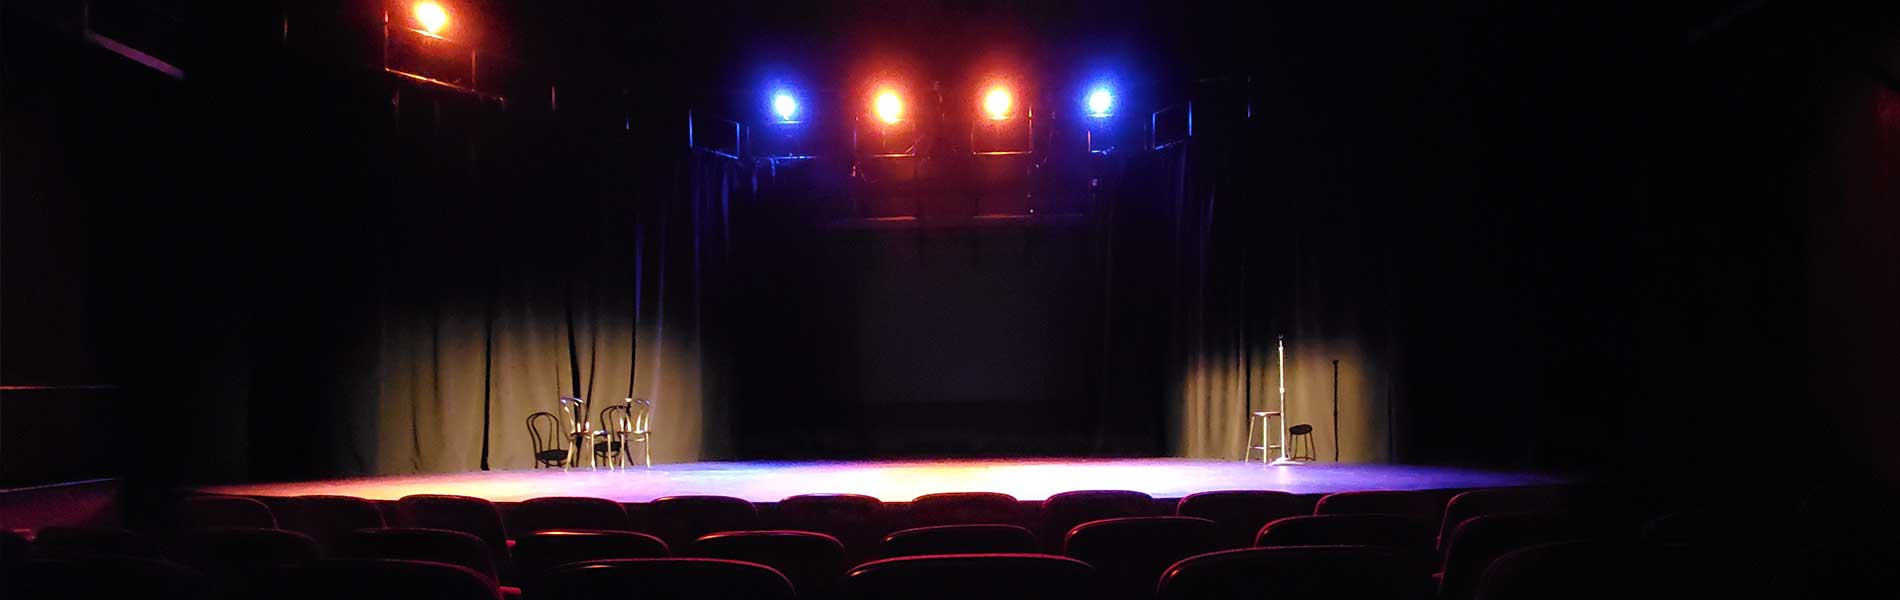 The Crescent Theatre is Clayton State University’s theatrical stage featuring productions by students in the Theatre program. This beautifully renovated 149 seat theatre serves as a performance and classroom space. banner image